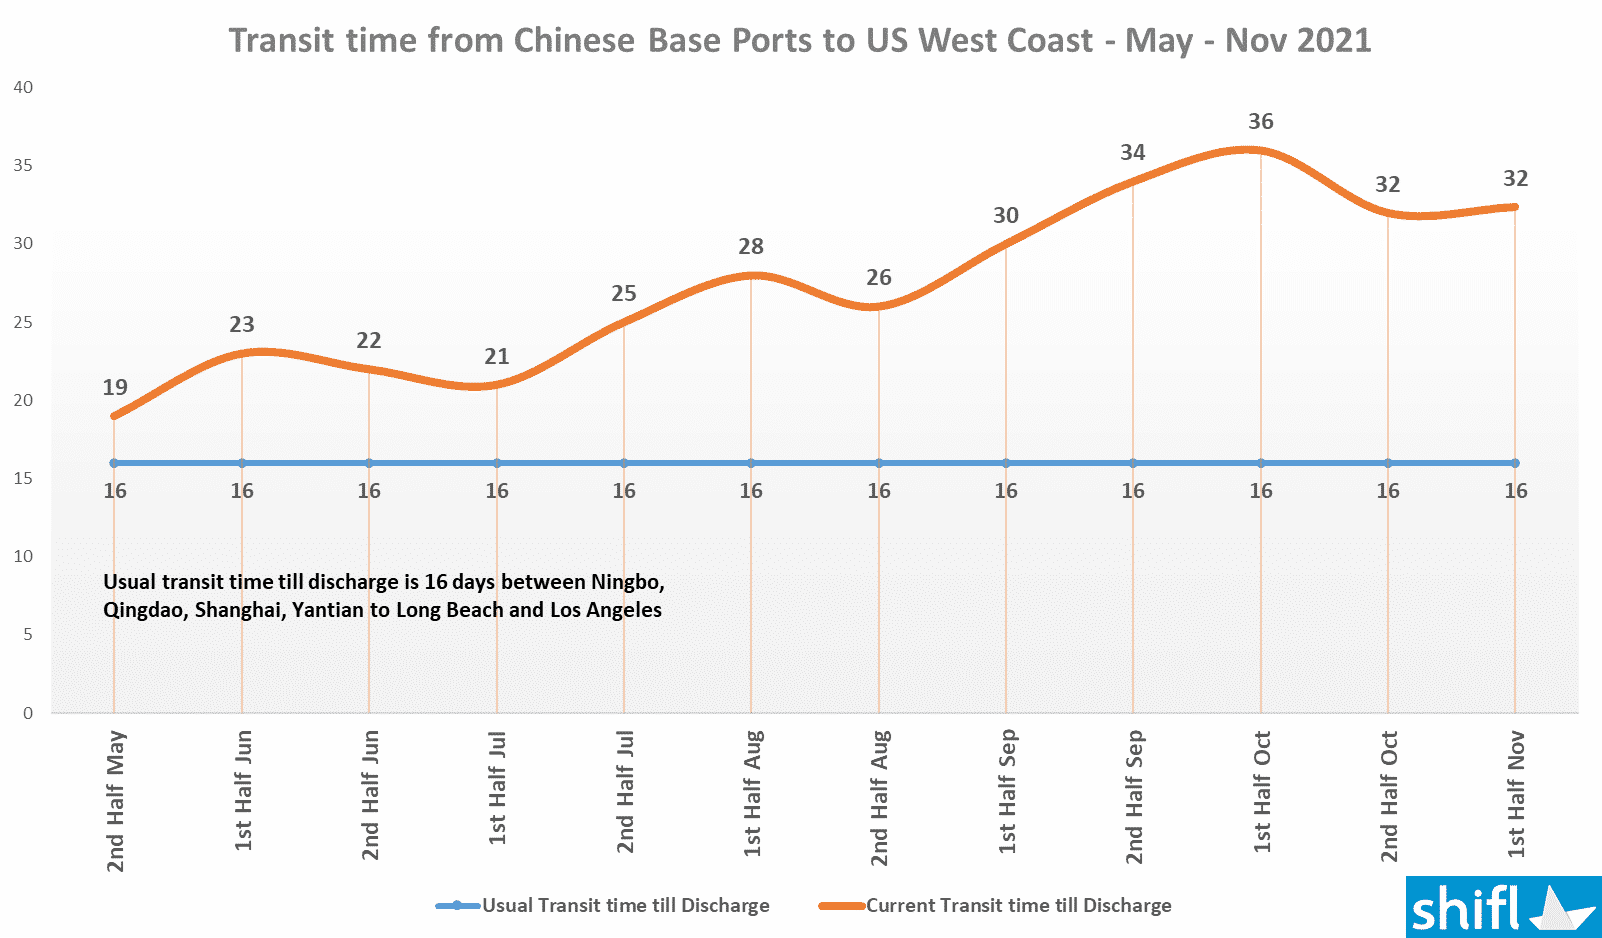 Chart showing transit time from chinese base ports to US west coast - nov 2021